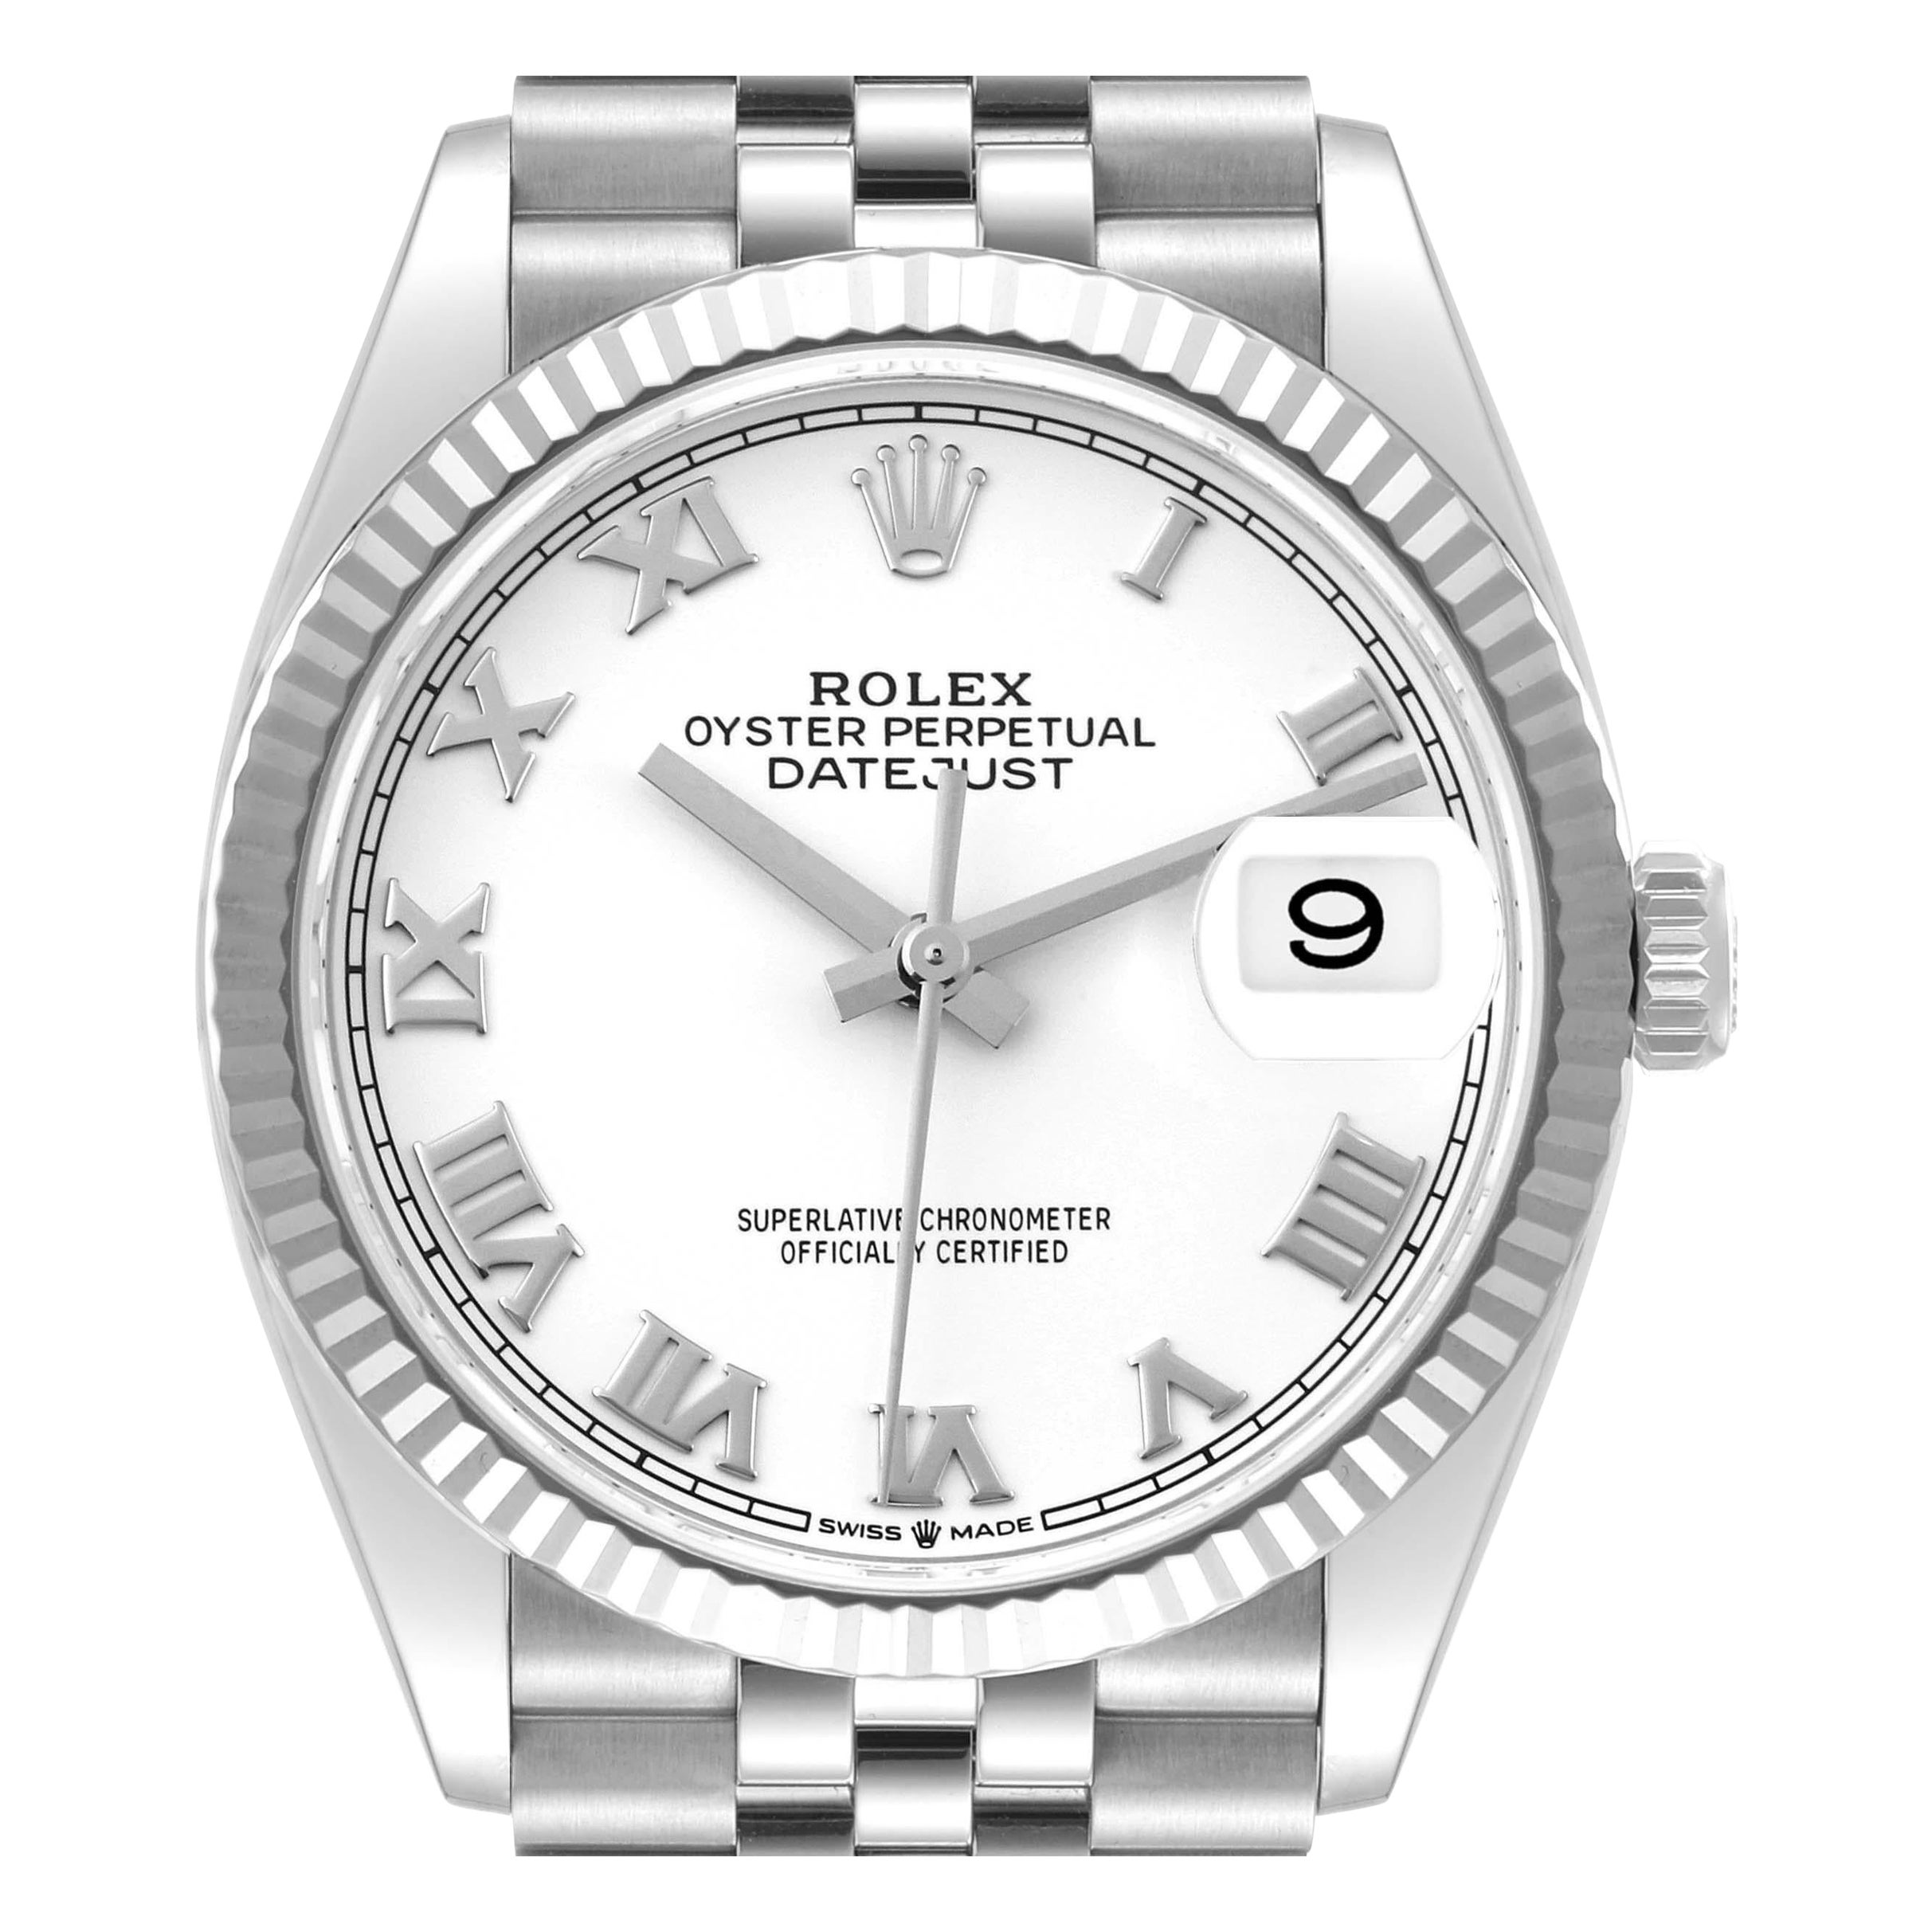 Rolex Datejust Steel White Gold White Dial Mens Watch 126234 Box Card